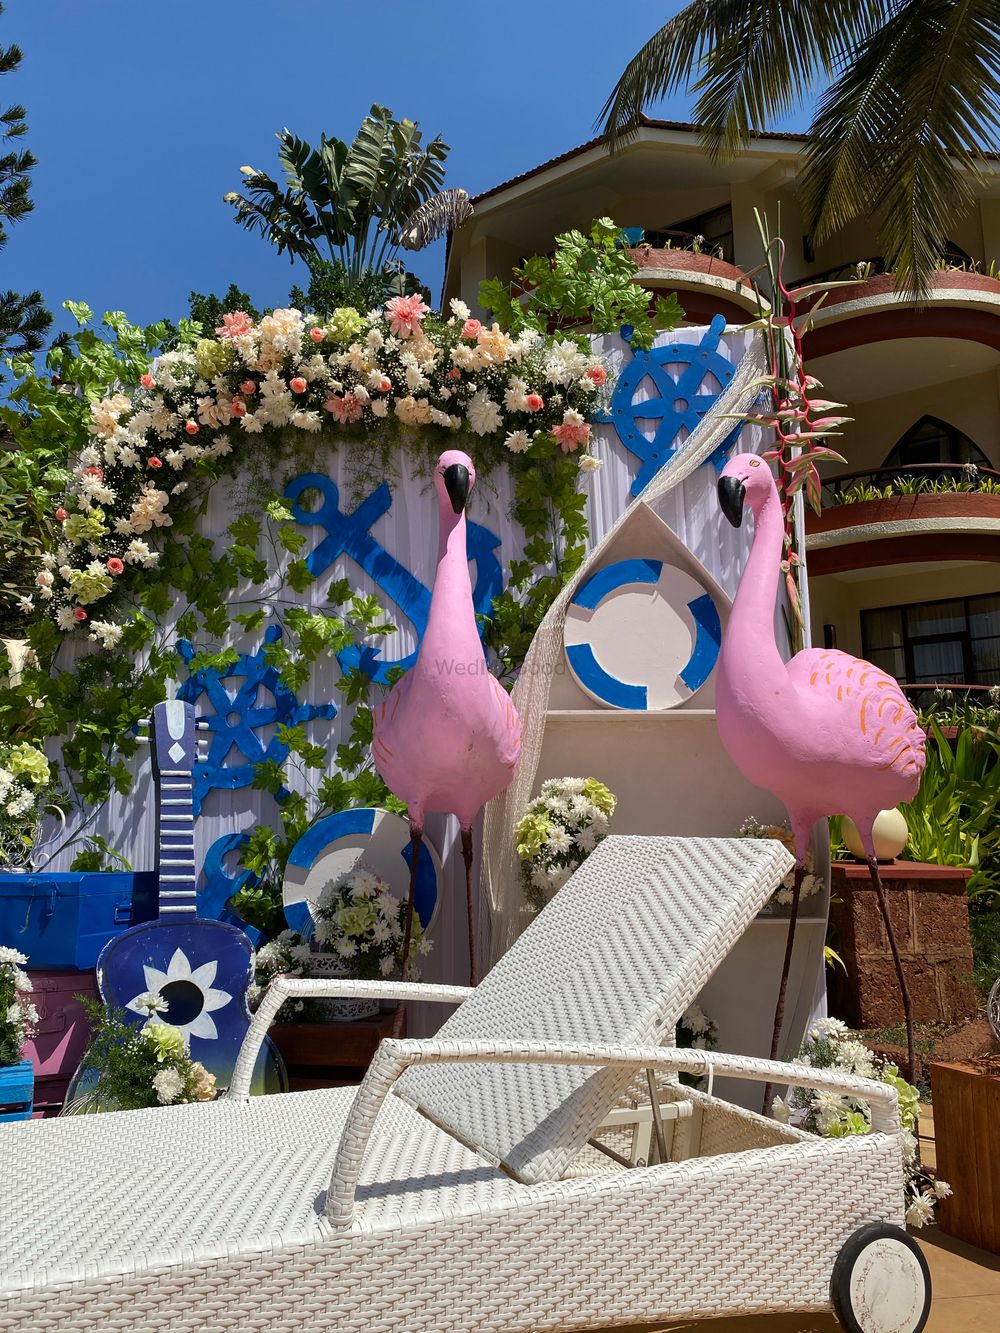 Photo of Nautical themed decor with flamingos and floral arrangements